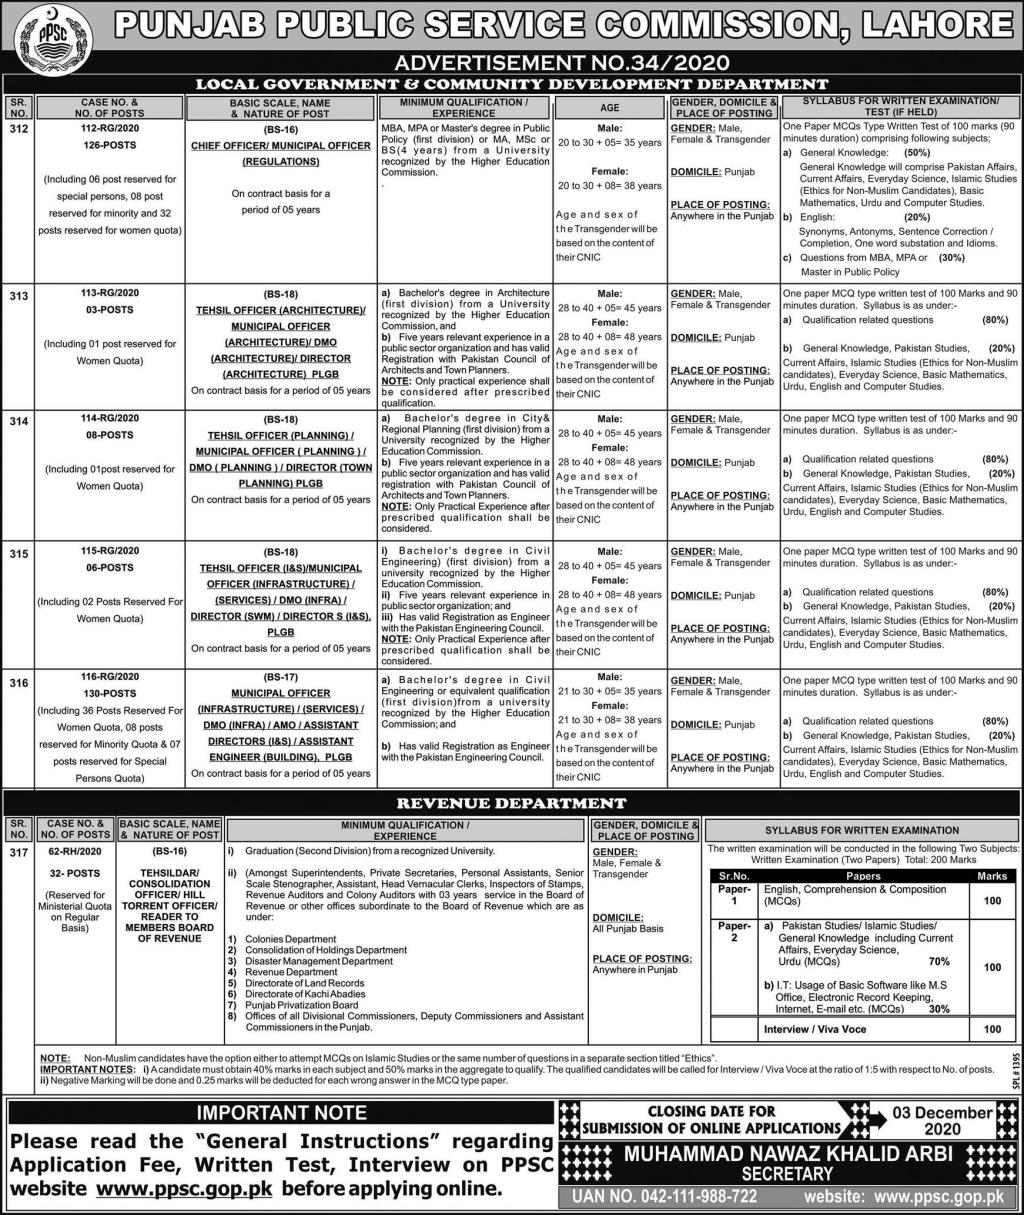 PPSC Jobs 2020 for 305+ Municipal Officers, Tehsil Officers, Assistant Directors, Tehsildar & Other in Punjab Govt Departments